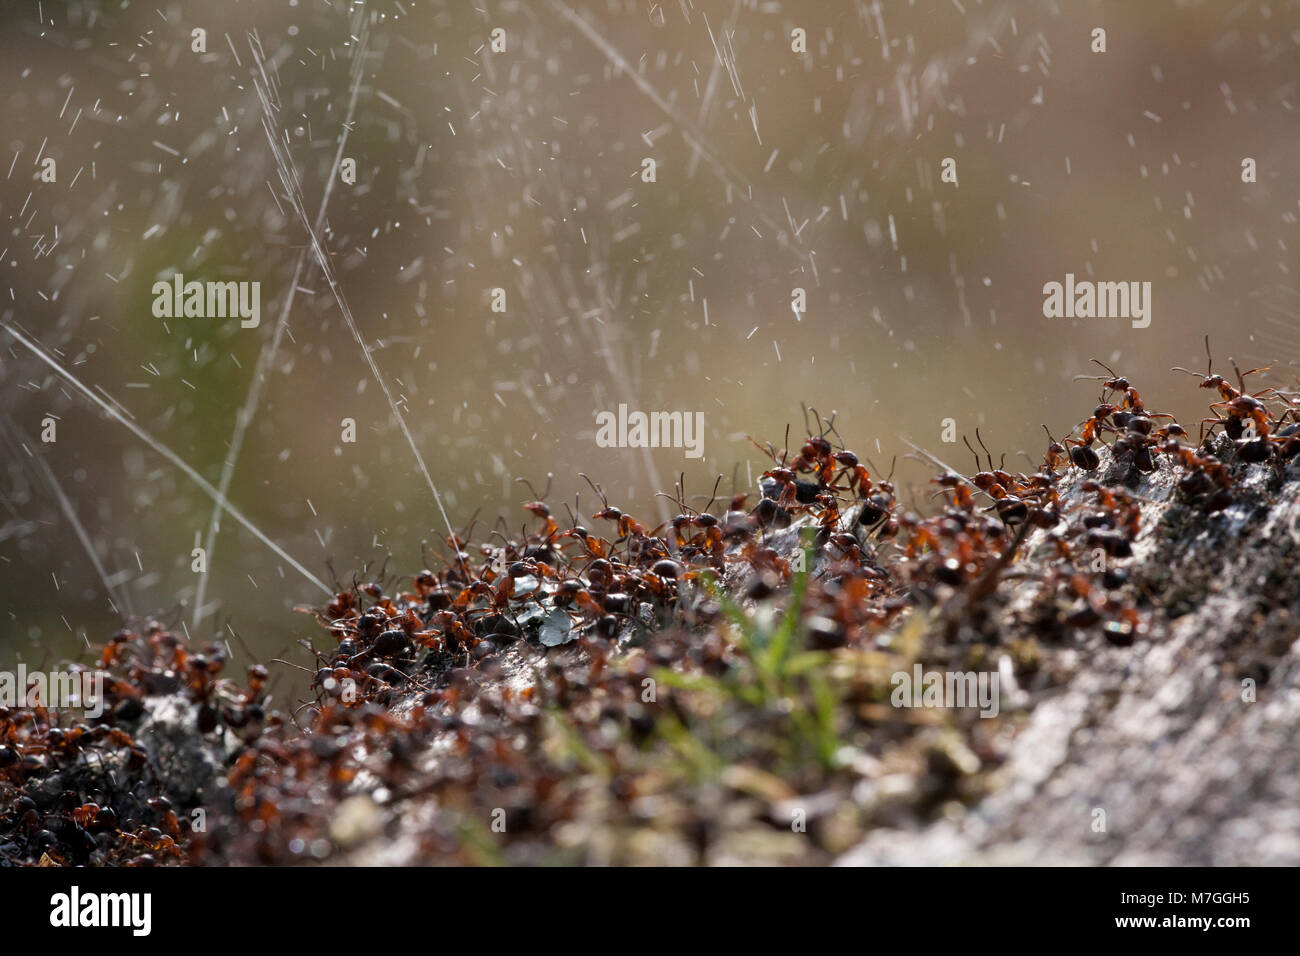 Wood ants-Formica rufa-defending their nest by spraying formic acid. The formic acid is used to deter any attacking predators. Dorset England UK GB. Stock Photo